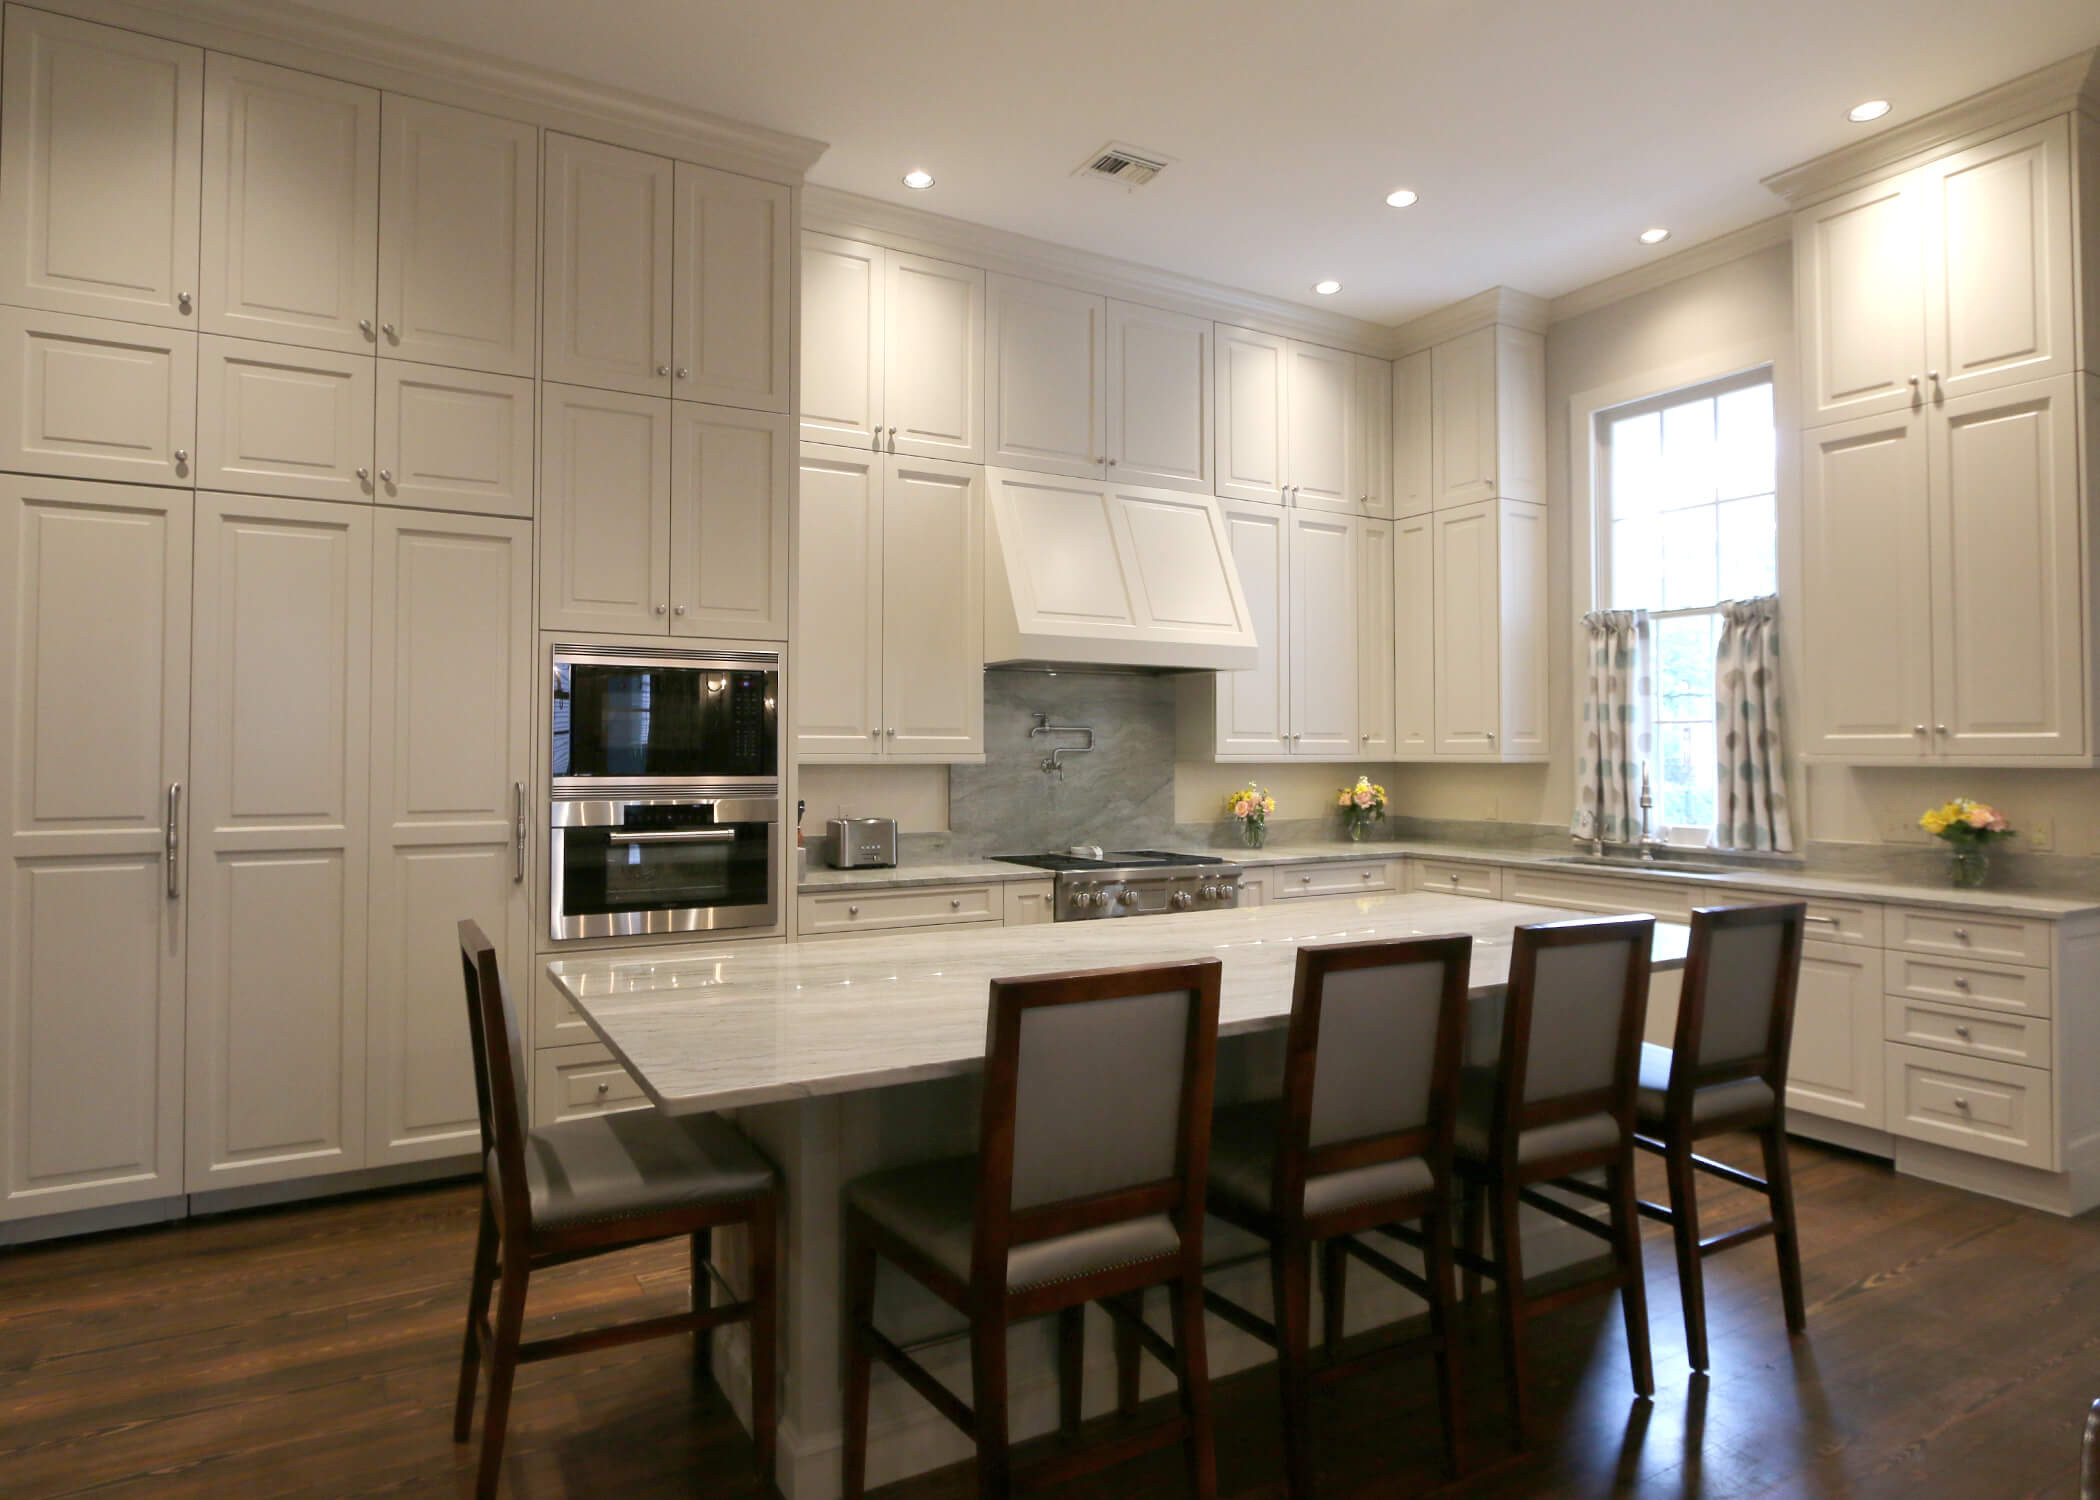 Traditional style Kitchen with white cabinets